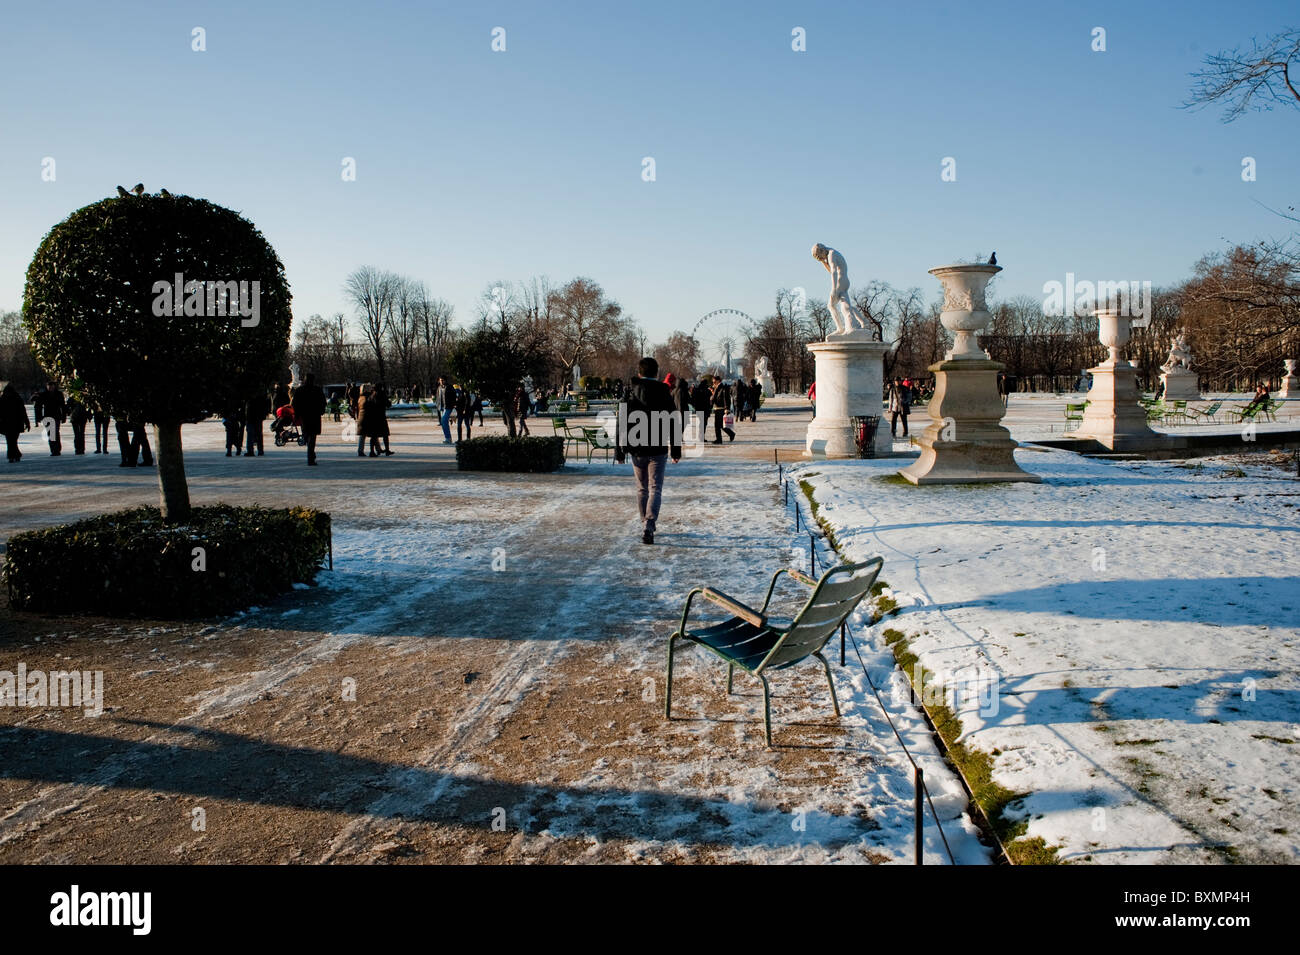 Paris, France, Outside French Urban Parks, 'Jardin des Tuileries', People Walking in the Snow Stock Photo